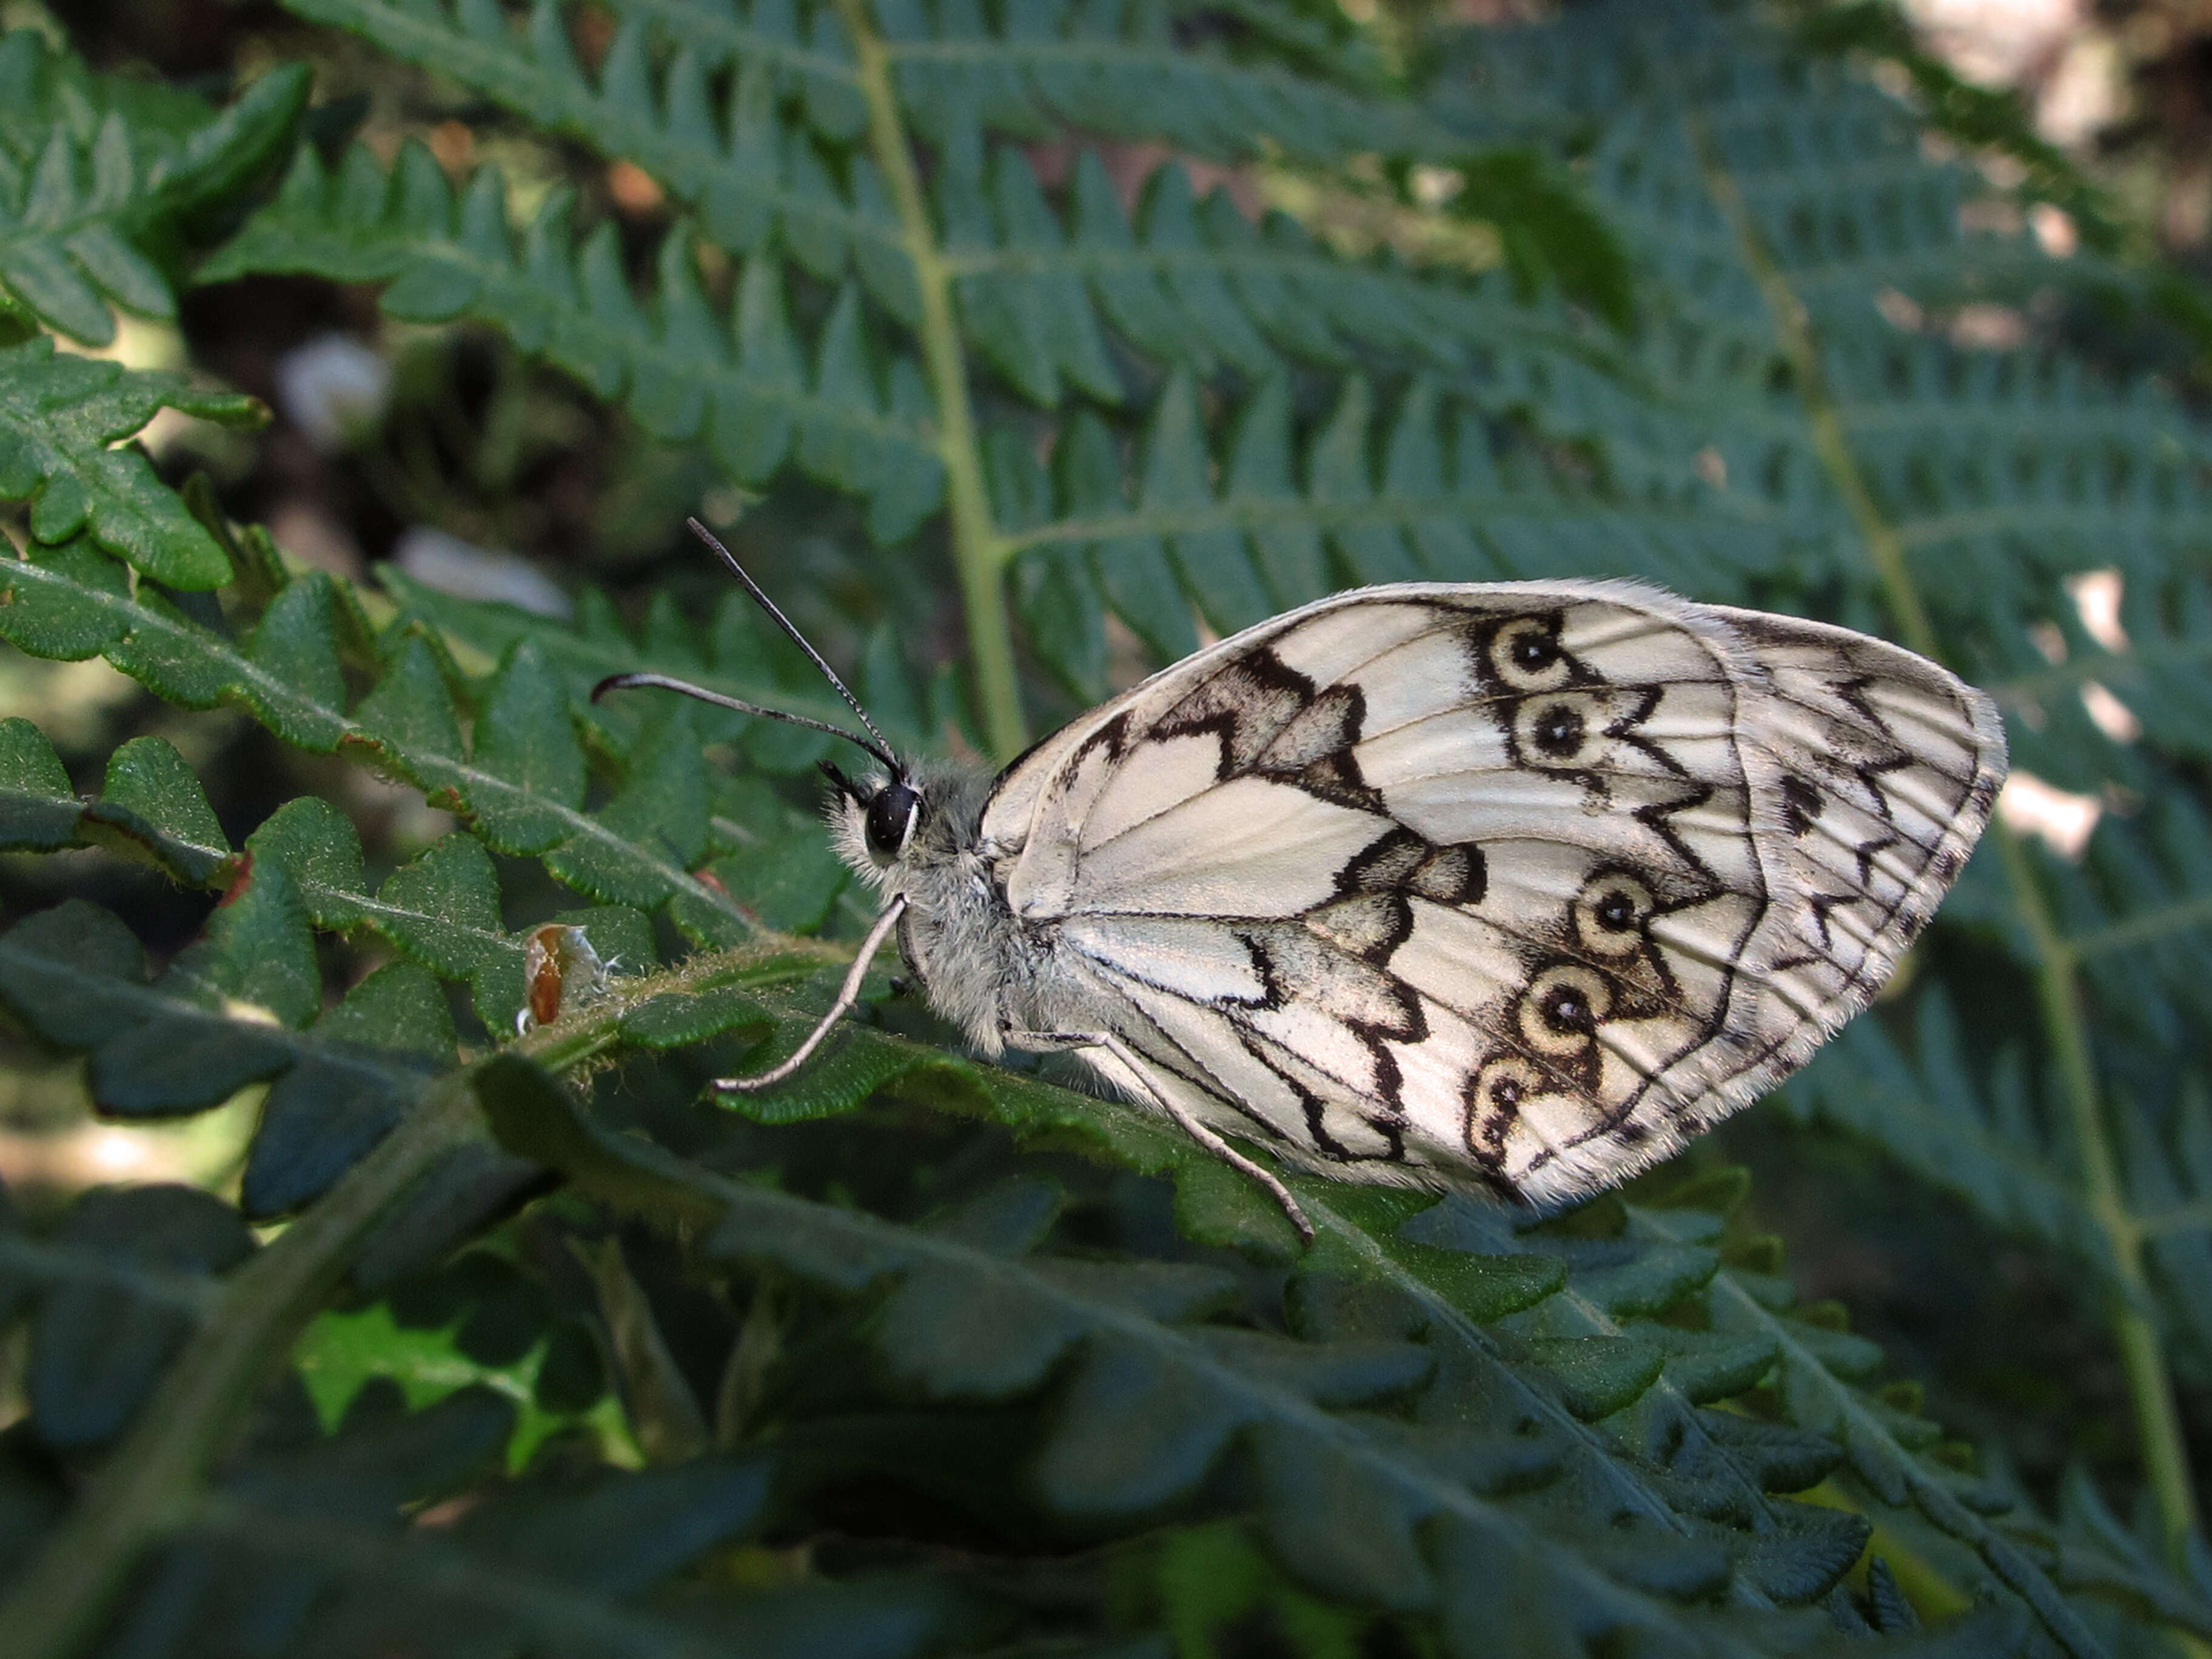 Image of Iberian Marbled White